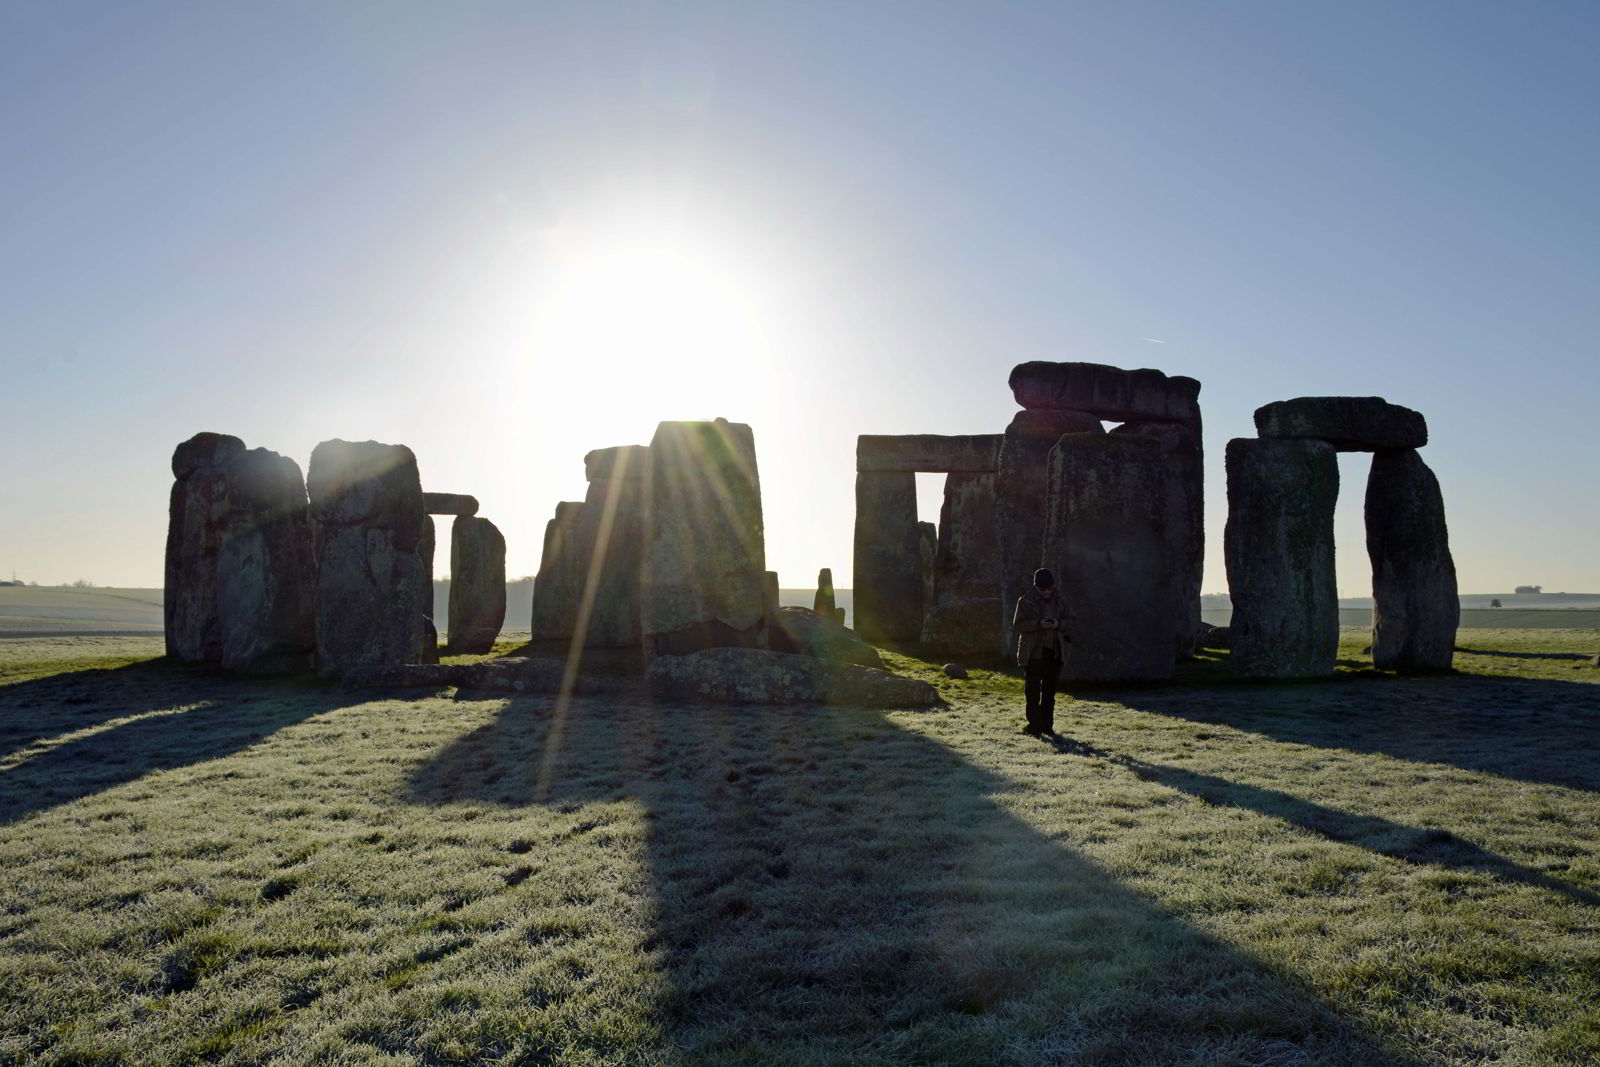 An image of the sunrise at the Stonehenge site in the UK - Stonehenge inner circle tours